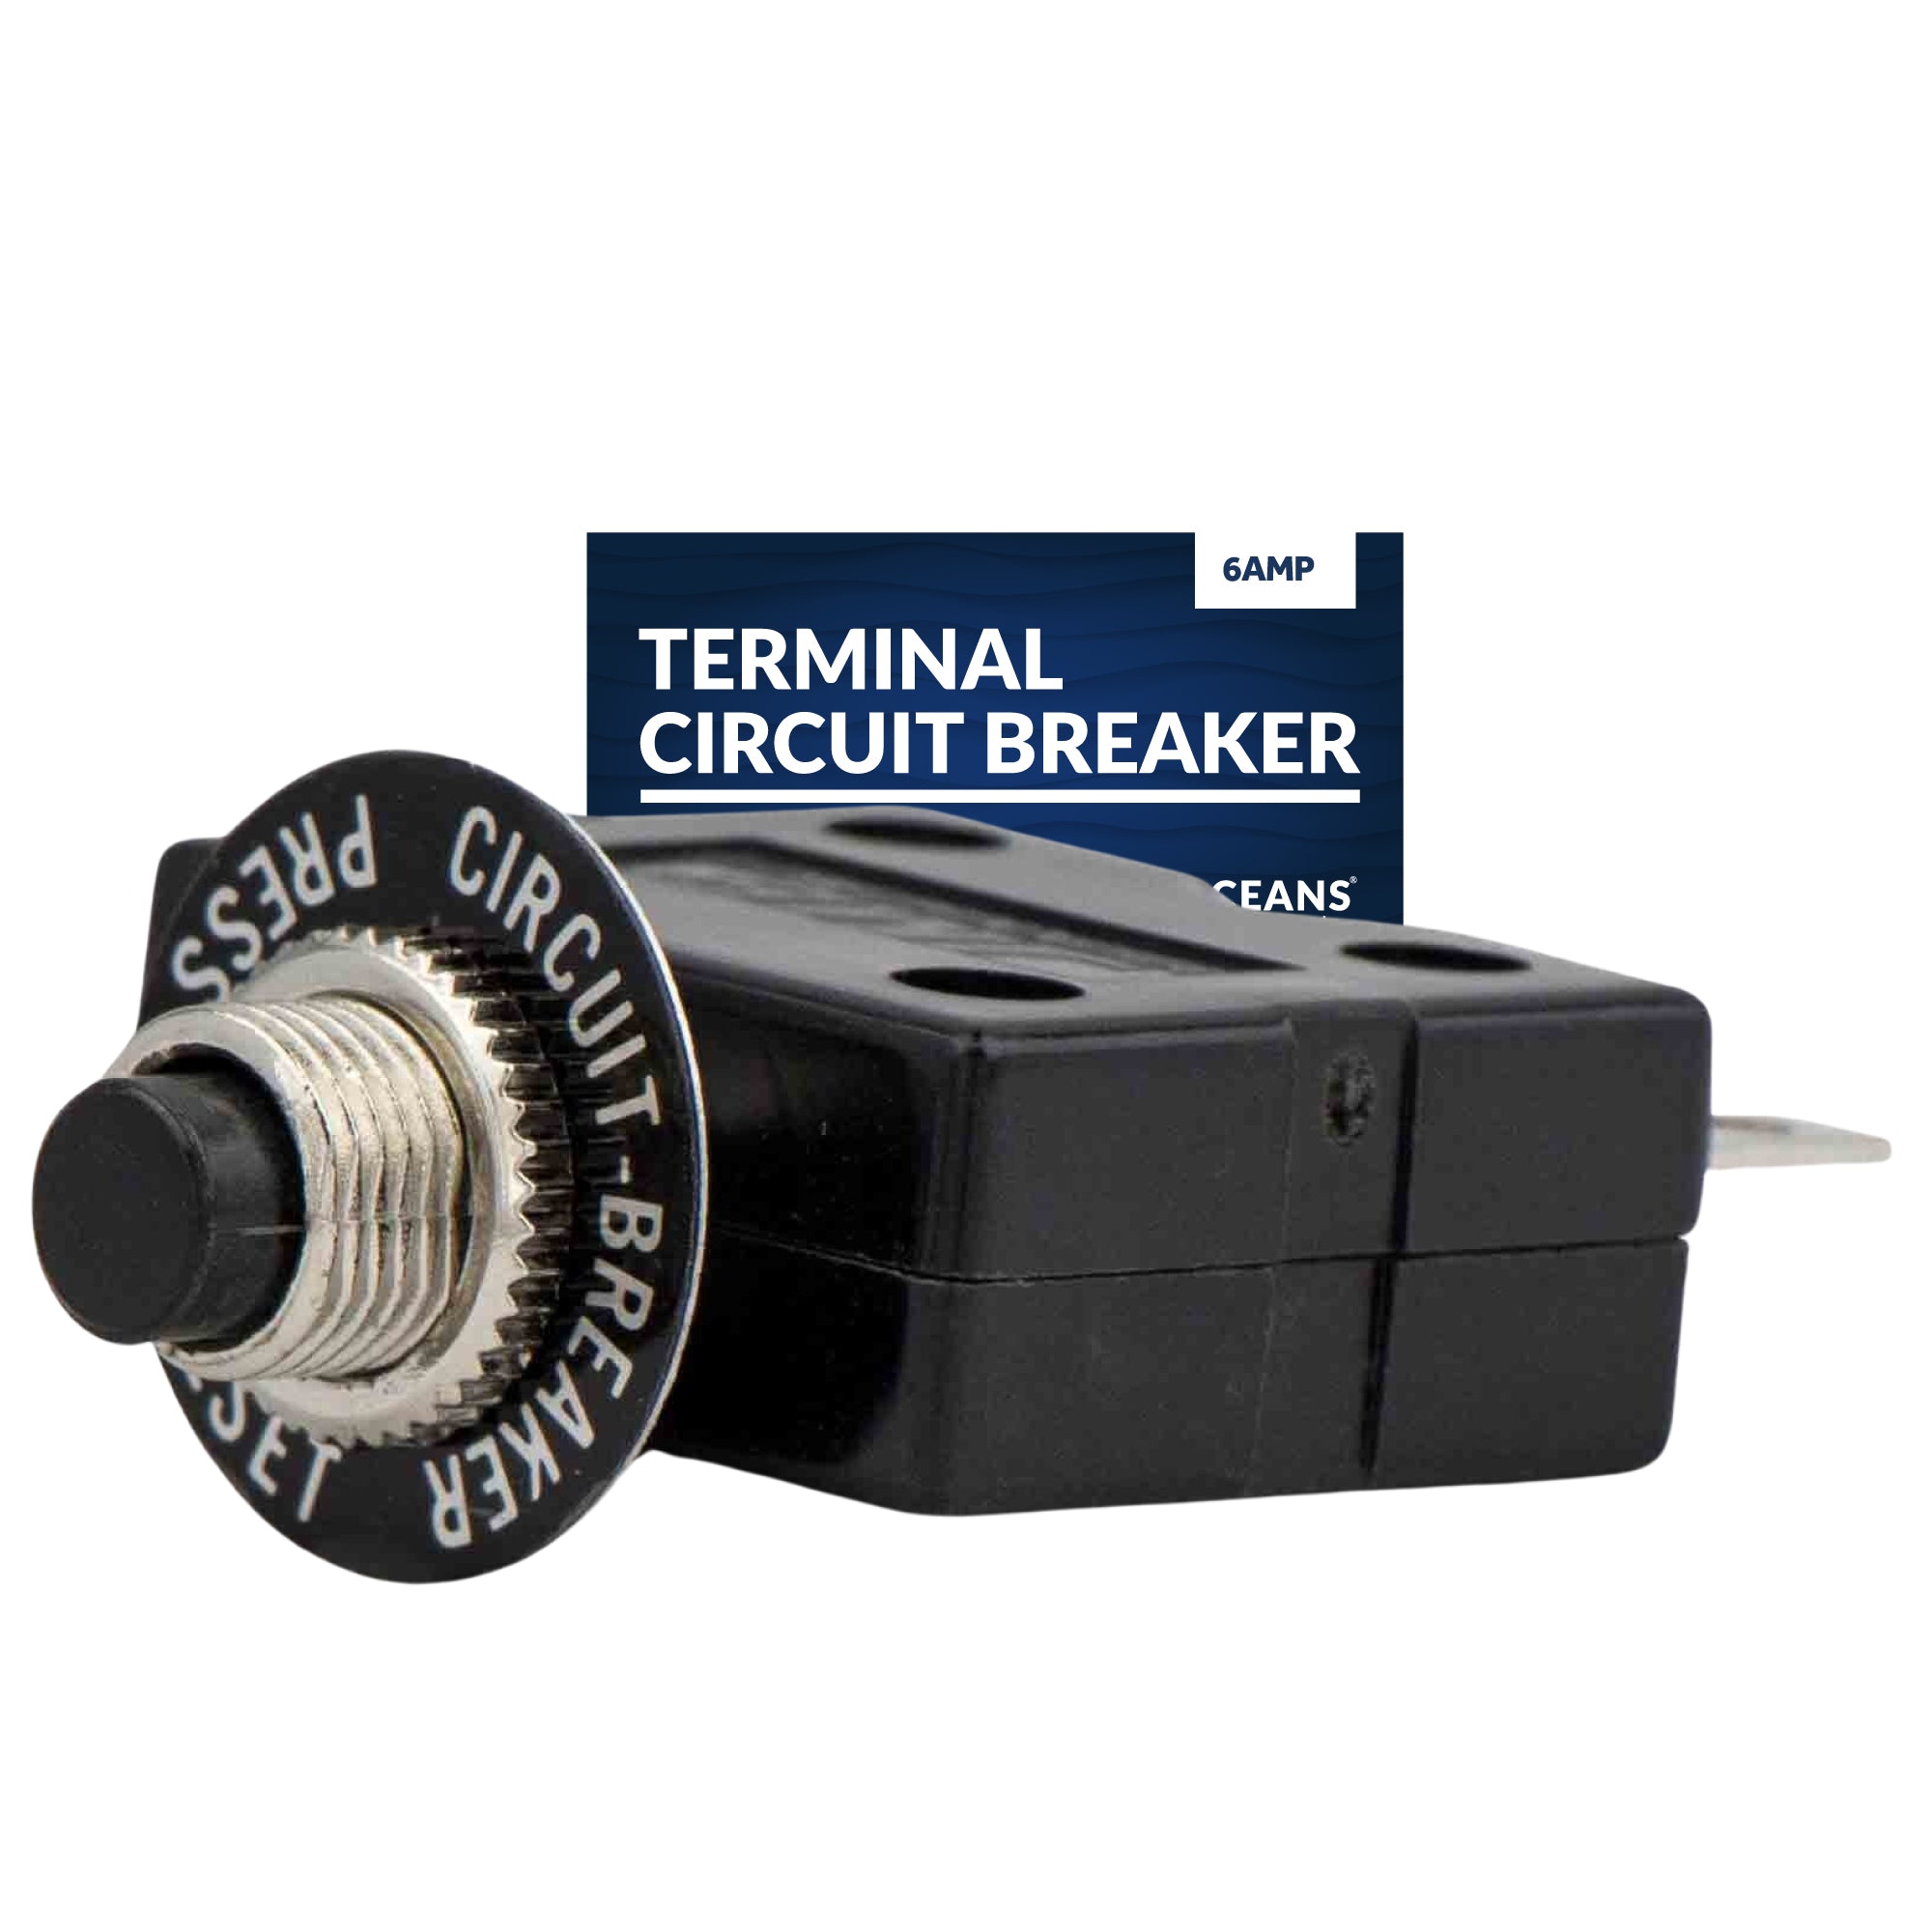 Terminal Circuit Breaker with Reset Button, 6 Amp - FO1679